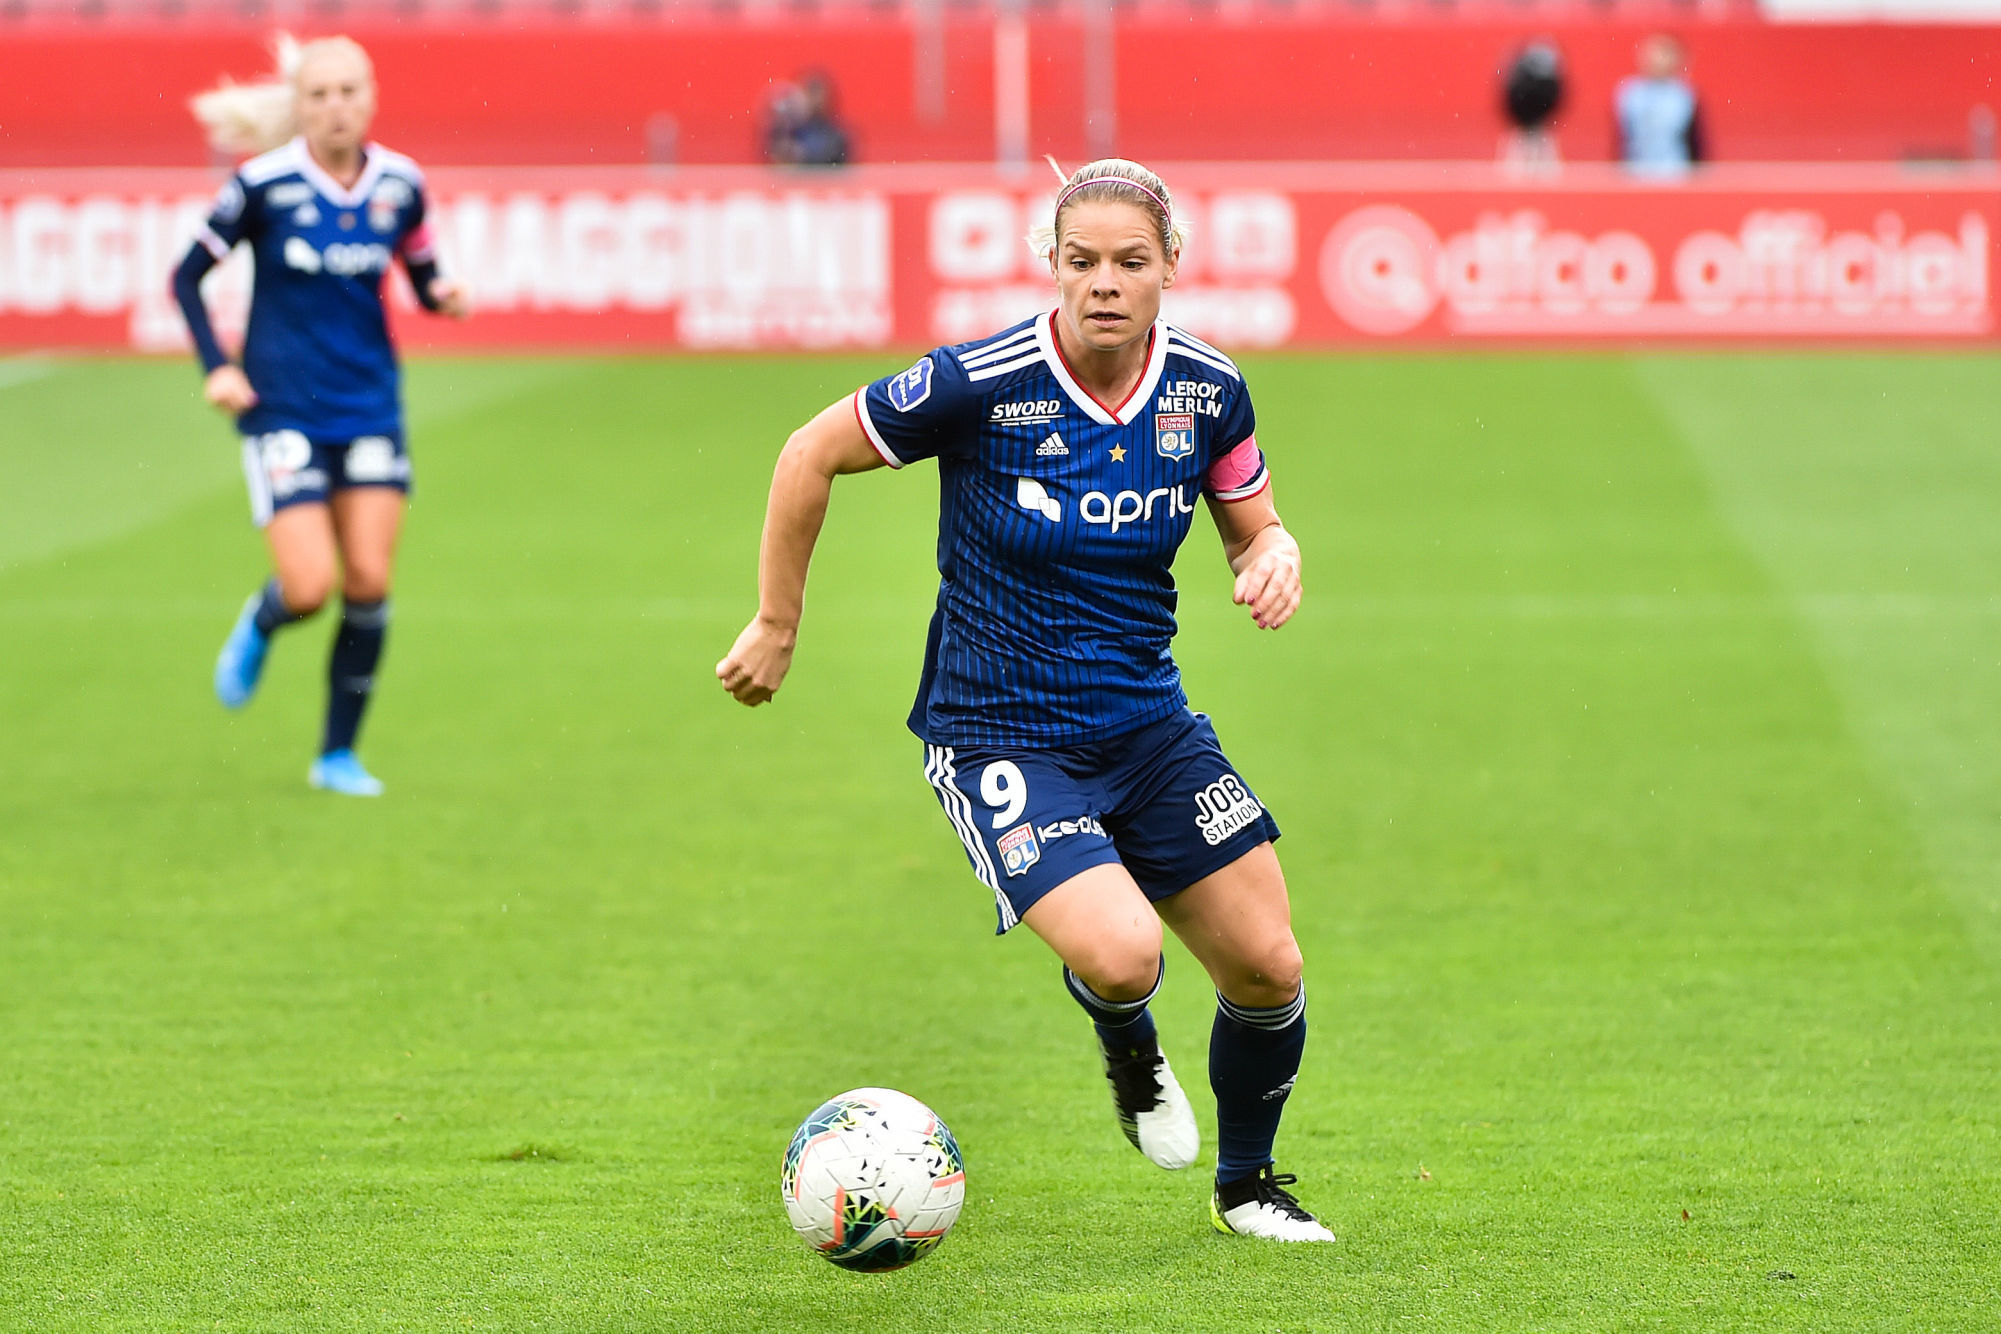 Eugenie LE SOMMER of LYON during the Women Division 1 match between Dijon and Lyon on October 20, 2019 in Dijon, France. (Photo by Vincent Poyer/Icon Sport) - Eugenie Le SOMMER - Dijon (France)